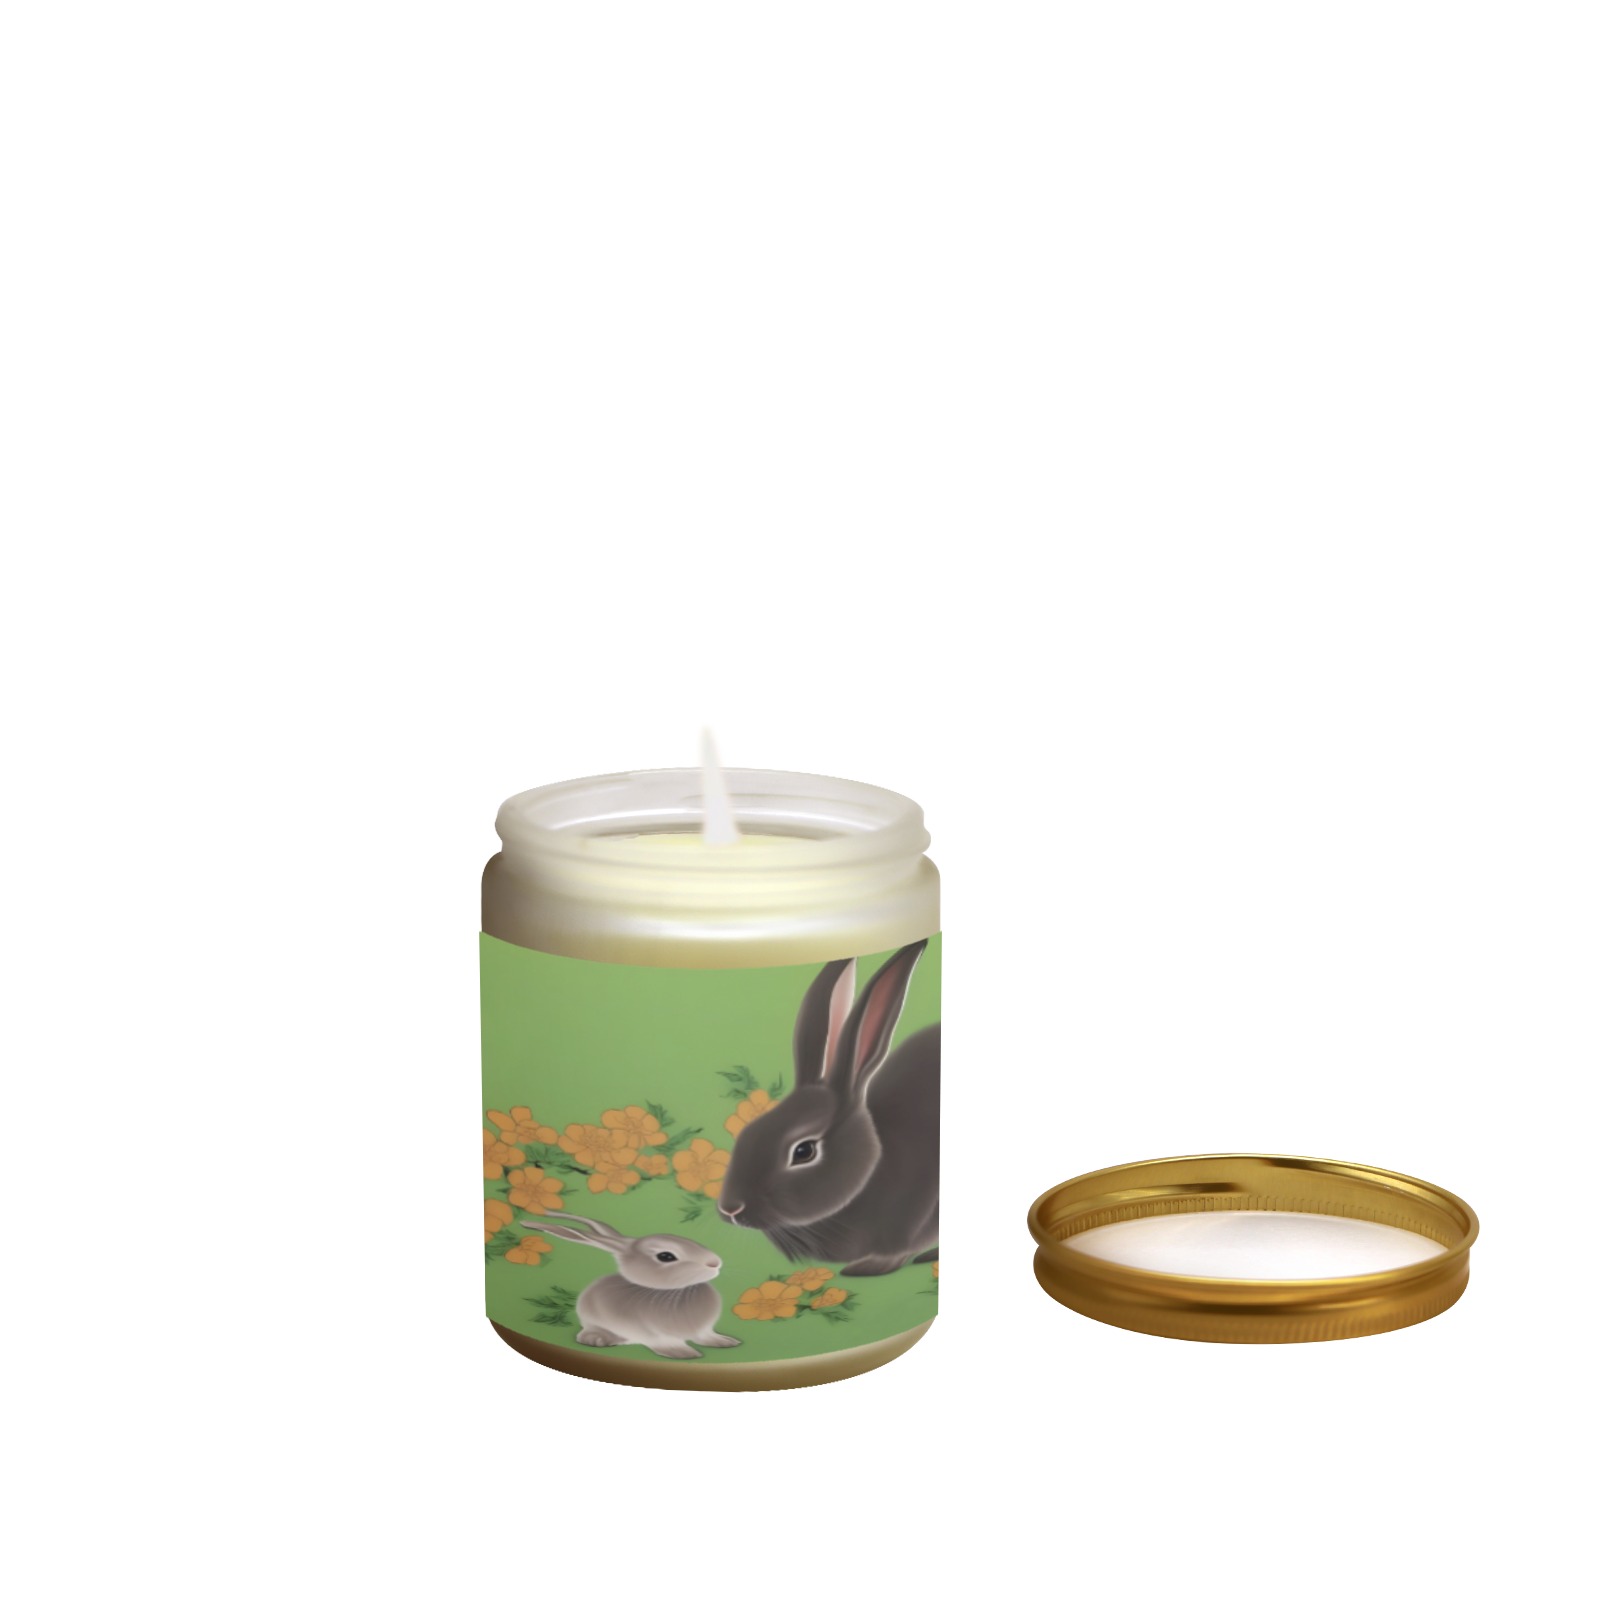 Rabbit and Kit Frosted Glass Candle Cup - Large Size (Lavender&Lemon)